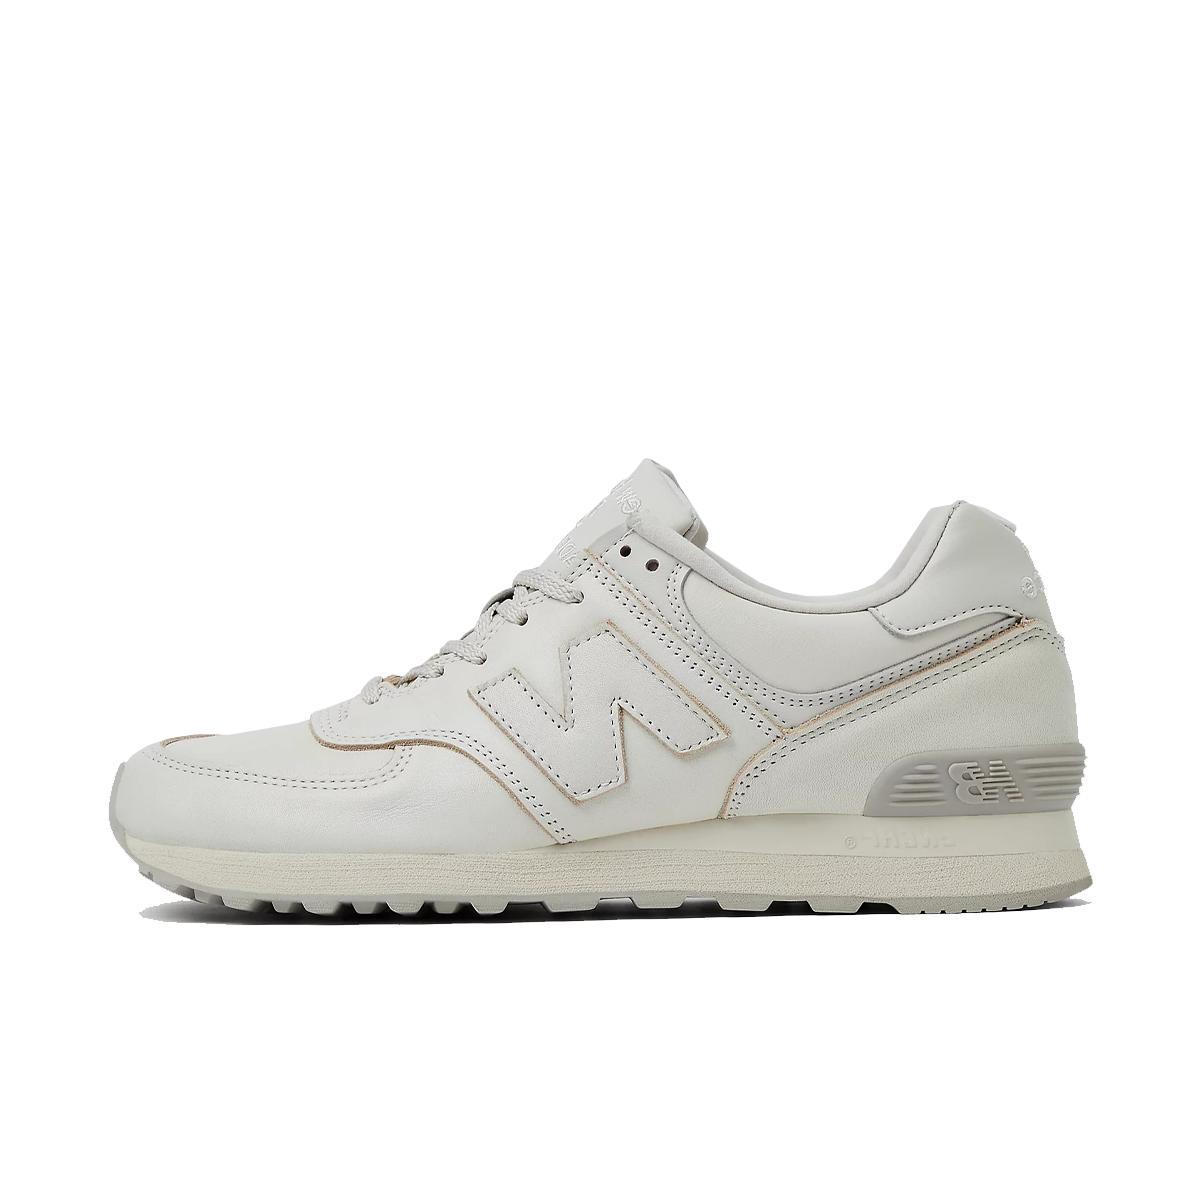 New Balance 576 'Off White' - Made in UK